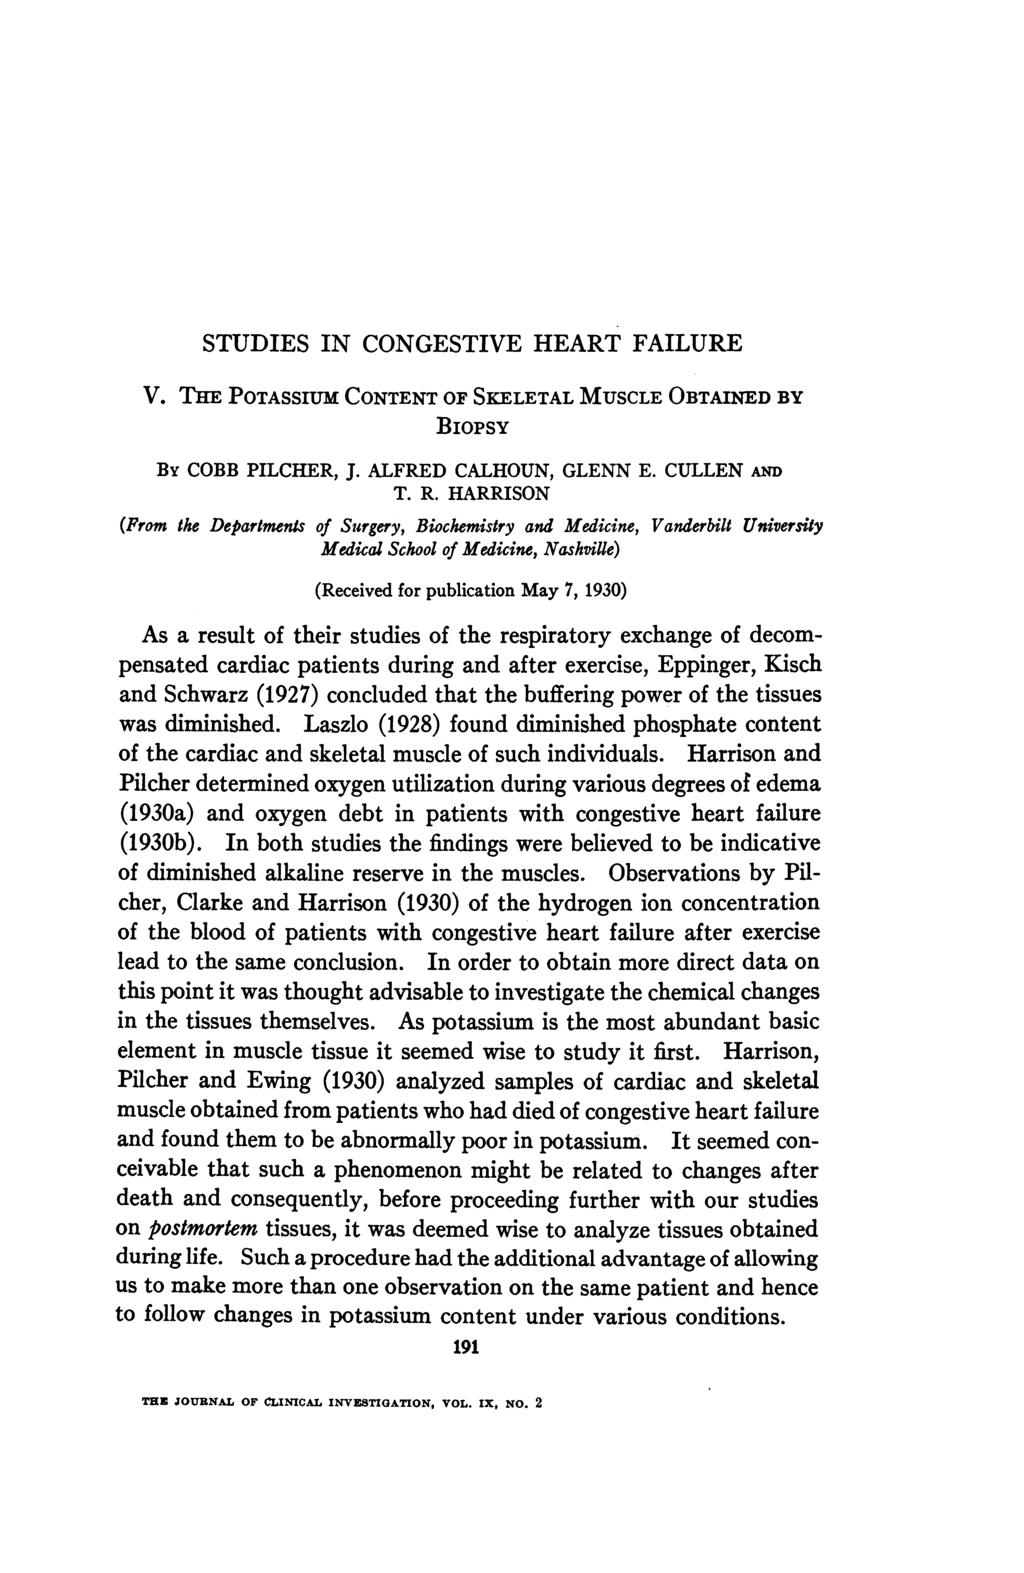 STUDIES IN CONGESTIVE HEART FAILURE V. THE POTASSIUM CONTENT OF SKELETAL MUSCLE OBTAINED BY BioPsY By COBB PILCHER, J. ALFRED CALHOUN, GLENN E. CULLEN AND T. R.